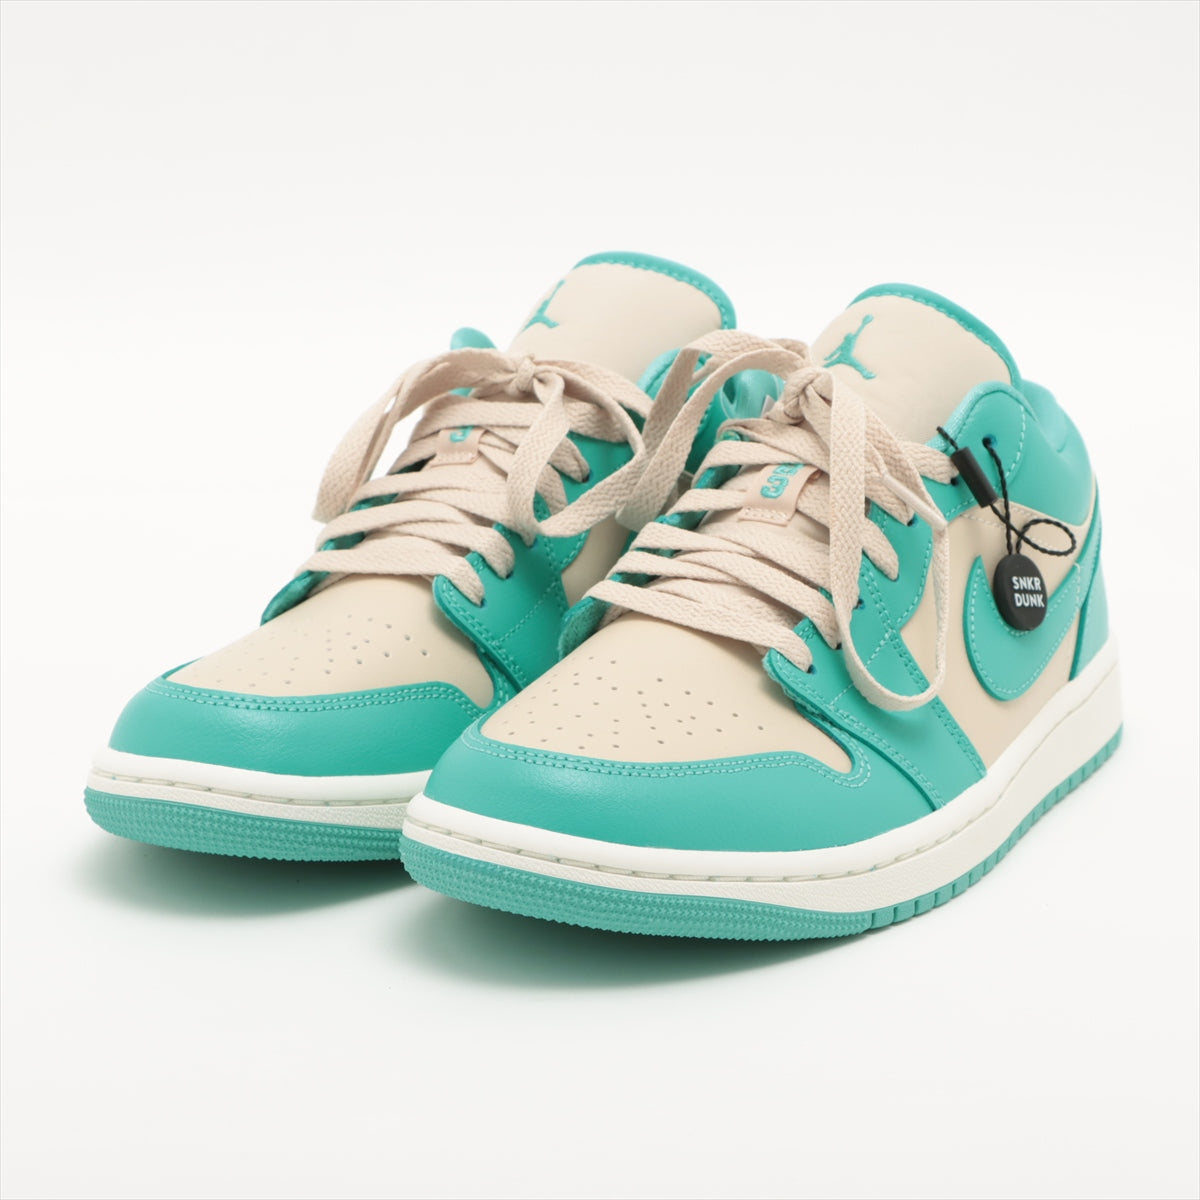 Nike AIR JORDAN 1 LOW Leather Sneakers 27㎝ Ladies' Beige x green DC0774-131 There is a box